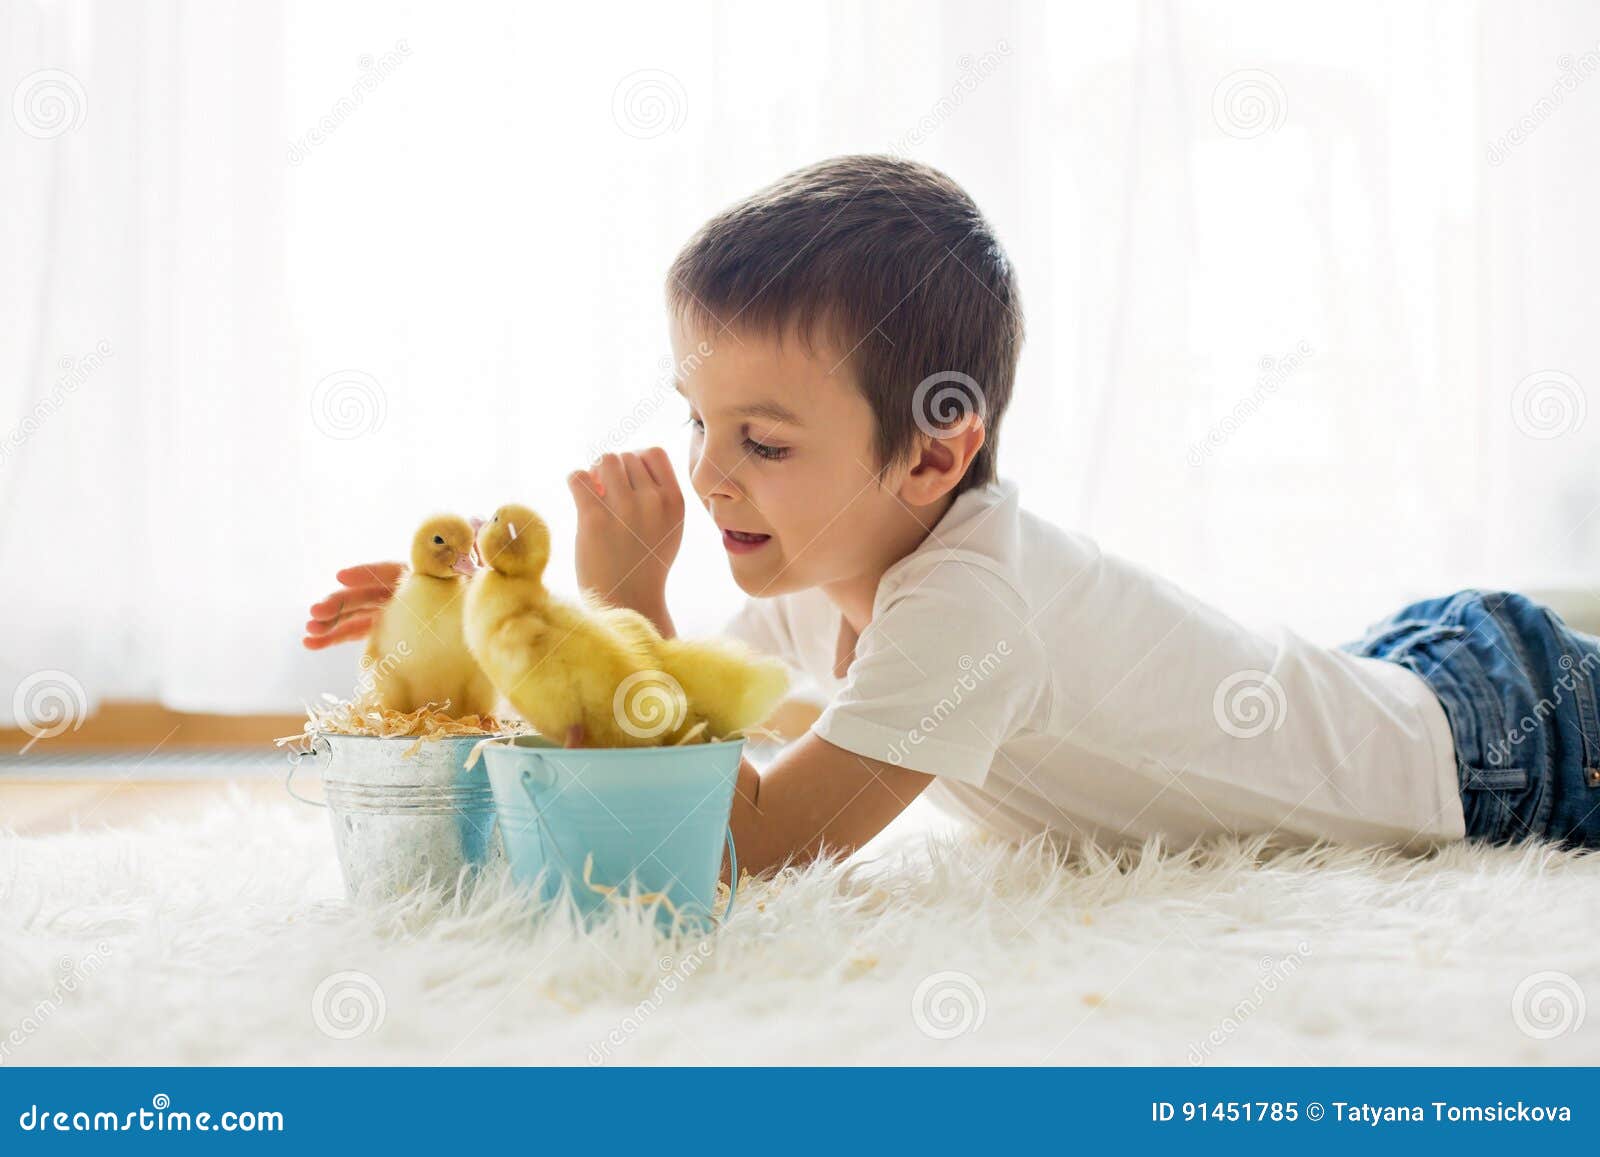 Cute Little Boy with Ducklings Springtime, Playing Together Stock Image ...